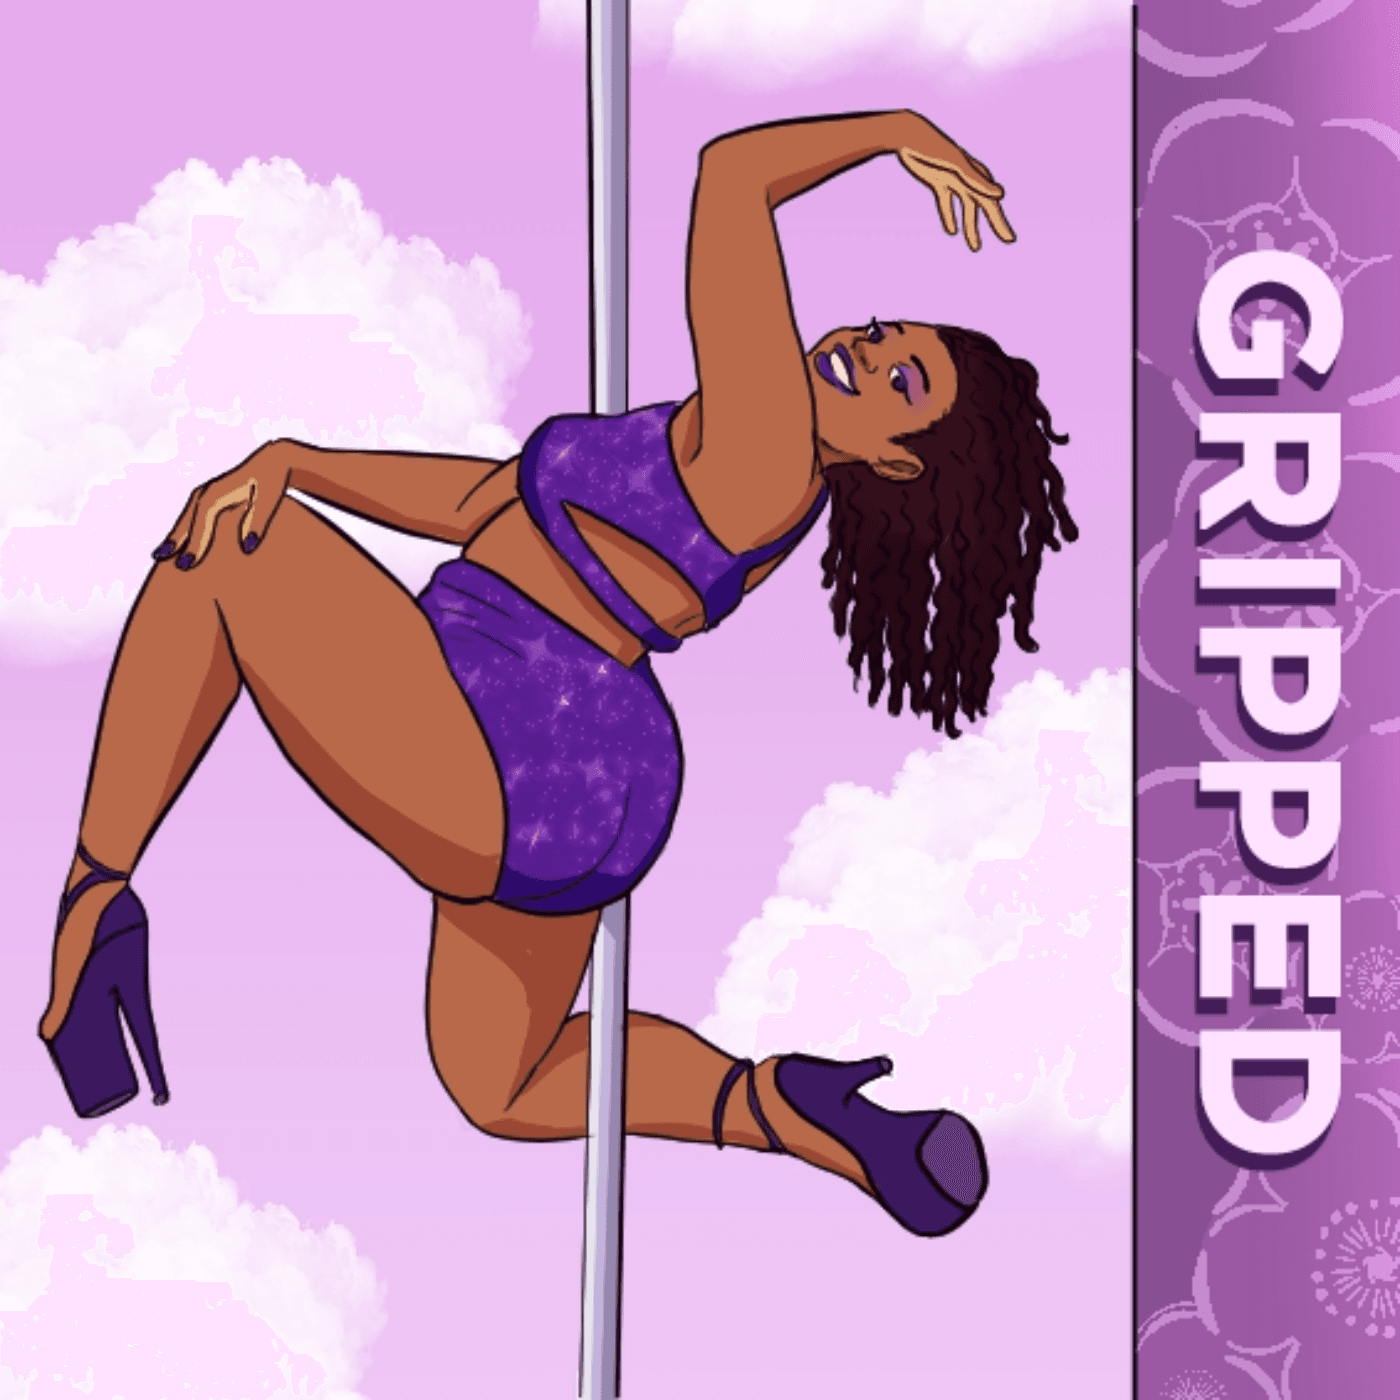 Thumbnail for "Gripped: The Passion For Pole Dancing".